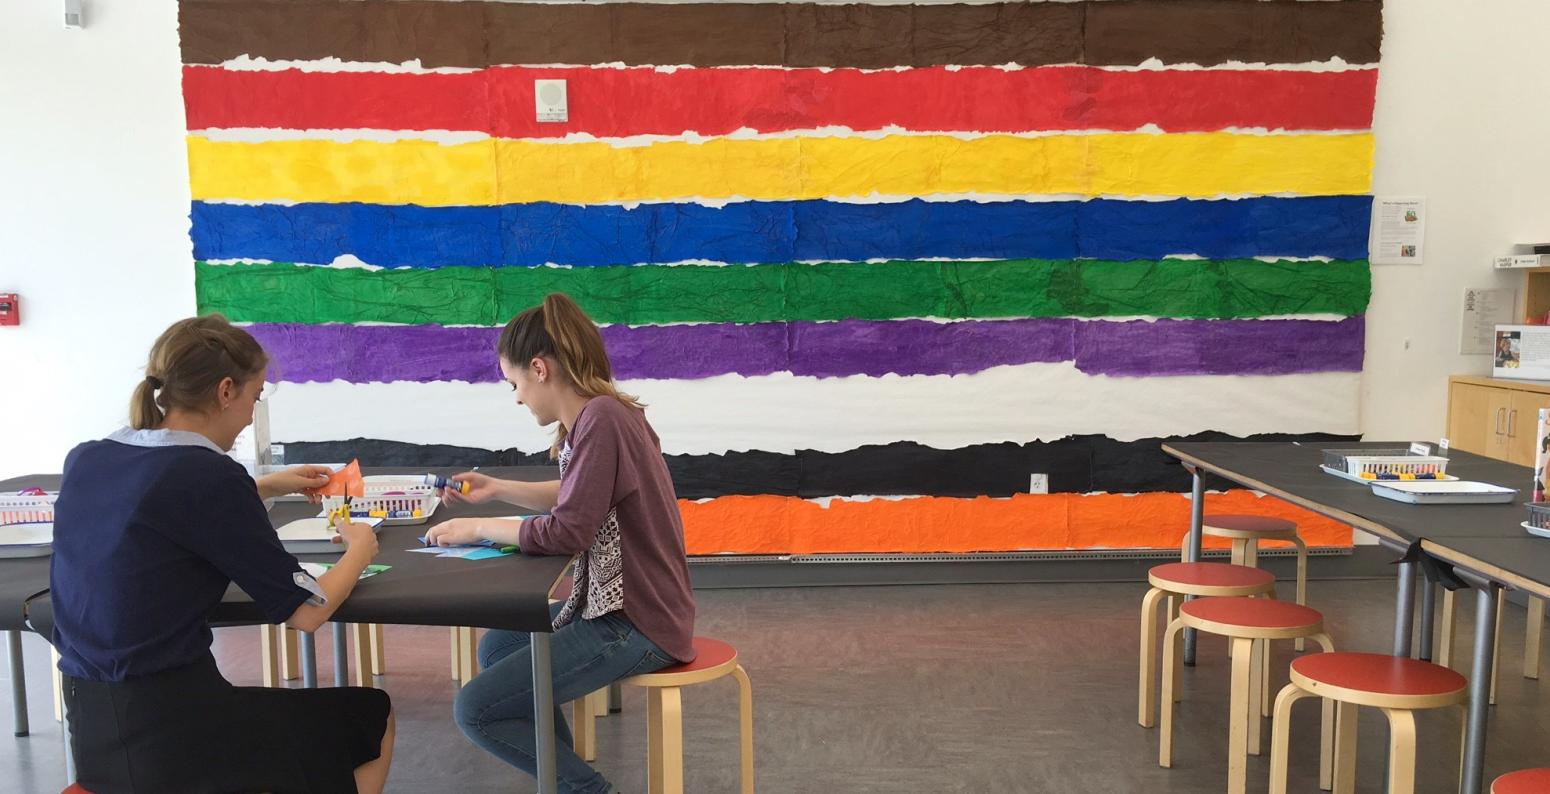 Two people sitting at an Art Studio table with the Brown Bear endpaper display wall behind them.